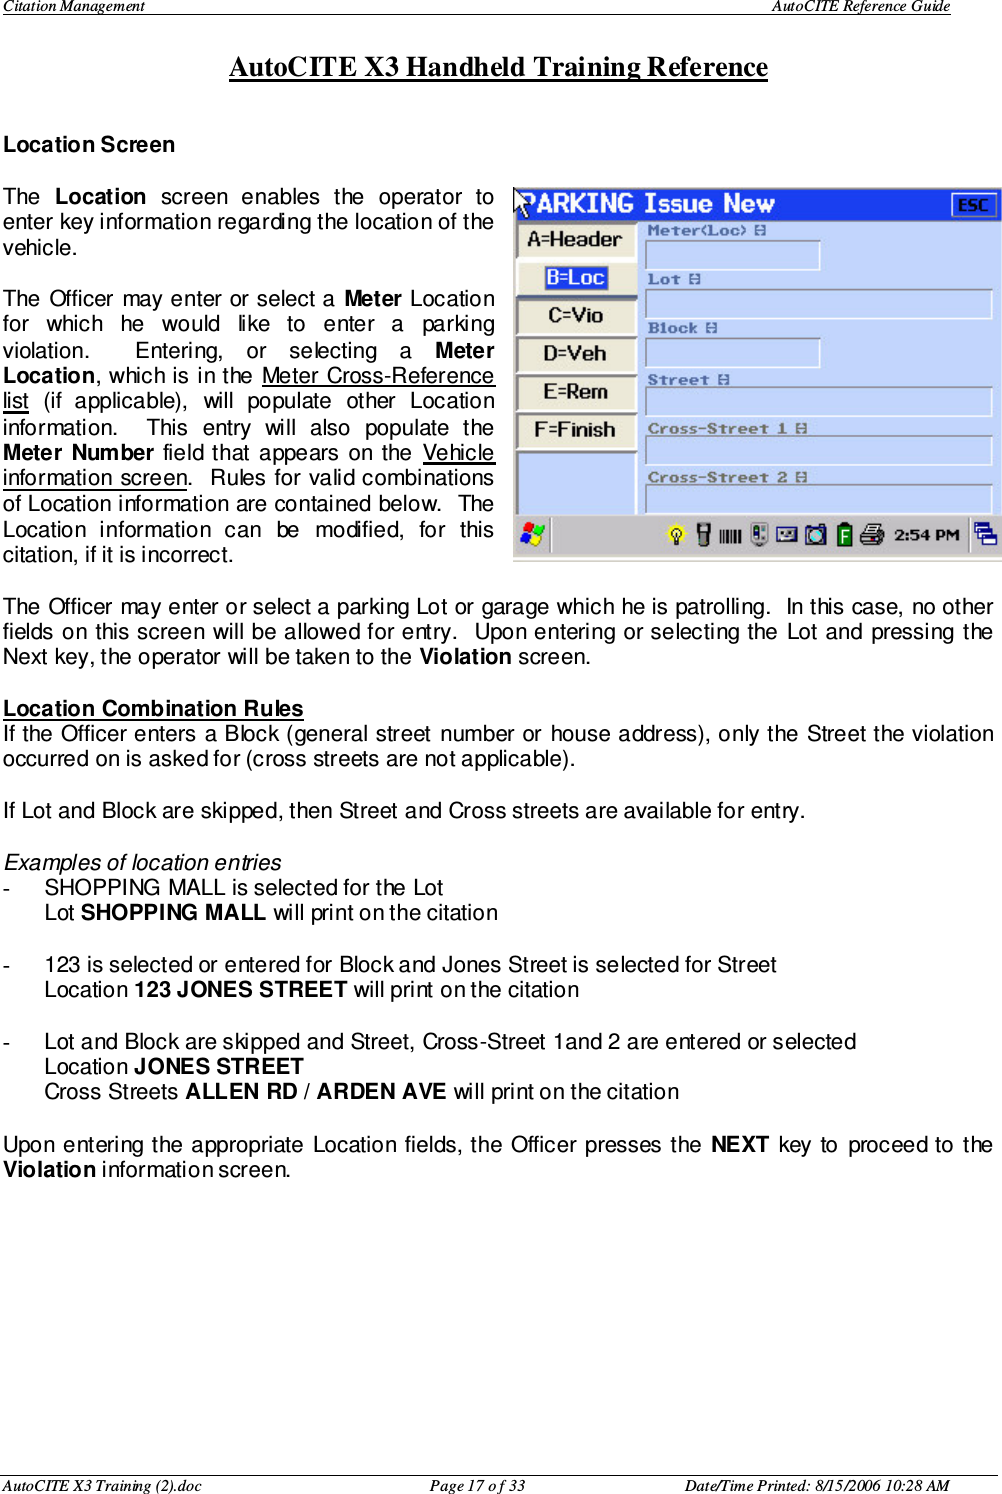 Citation Management    AutoCITE Reference Guide  AutoCITE X3 Handheld Training Reference AutoCITE X3 Training (2).doc  Page 17 o f 33  Date/Time Printed: 8/15/2006 10:28 AM Location Screen  The  Location  screen  enables  the  operator  to enter key information regarding the location of the vehicle.  The  Officer  may enter or select a  Meter Location for  which  he  would  like  to  enter  a  parking violation.    Entering,  or  selecting  a  Meter Location, which is in the  Meter  Cross-Reference list  (if  applicable),  will  populate  other  Location information.    This  entry  will  also  populate  the Meter  Number  field that  appears  on  the  Vehicle information screen.  Rules for valid combinations of Location information are contained below.  The Location  information  can  be  modified,  for  this citation, if it is incorrect.  The Officer may enter or select a parking Lot or garage which he is patrolling.  In this case, no other fields on this screen will  be allowed for entry.   Upon entering or selecting the  Lot and  pressing the Next key, the operator will be taken to the Violation screen.  Location Combination Rules If the Officer enters a Block (general street  number or  house address), only the  Street the violation occurred on is asked for (cross streets are not applicable).    If Lot and Block are skipped, then Street and Cross streets are available for entry.    Examples of location entries -  SHOPPING MALL is selected for the Lot     Lot SHOPPING MALL will print on the citation  -  123 is selected or entered for Block and Jones Street is selected for Street    Location 123 JONES STREET will print on the citation  -  Lot and Block are skipped and Street, Cross-Street 1and 2 are entered or selected Location JONES STREET Cross Streets ALLEN RD / ARDEN AVE will print on the citation  Upon entering the appropriate  Location fields, the  Officer  presses the  NEXT  key to  proceed to the Violation information screen. 